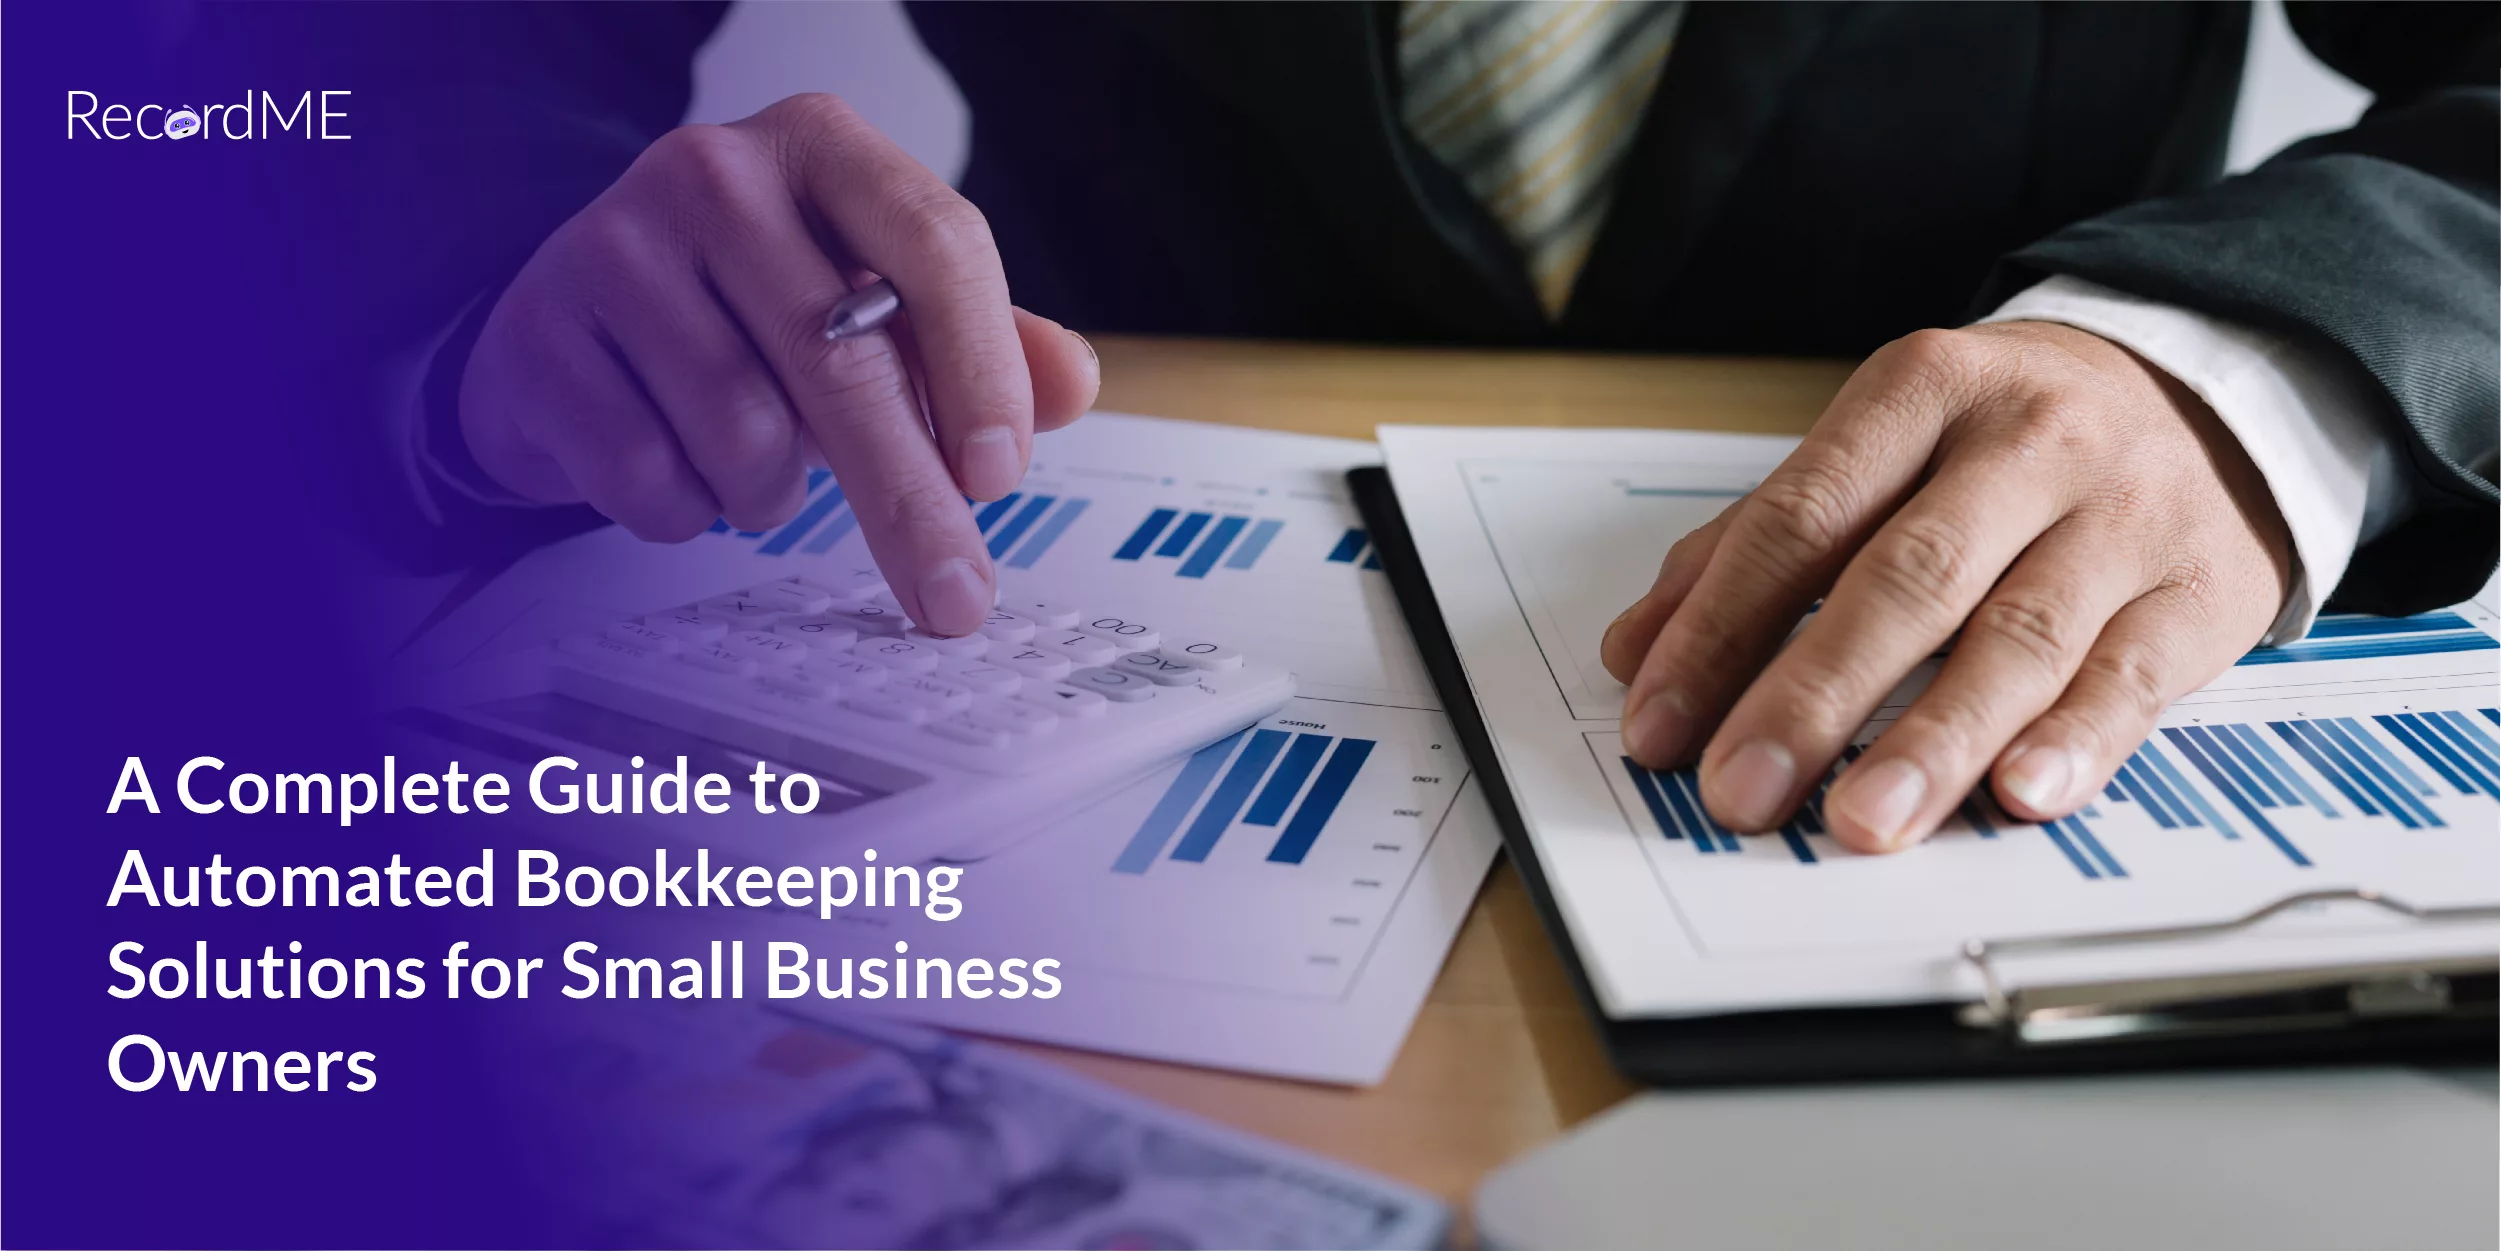 Automated Bookkeeping Solutions for Small Business